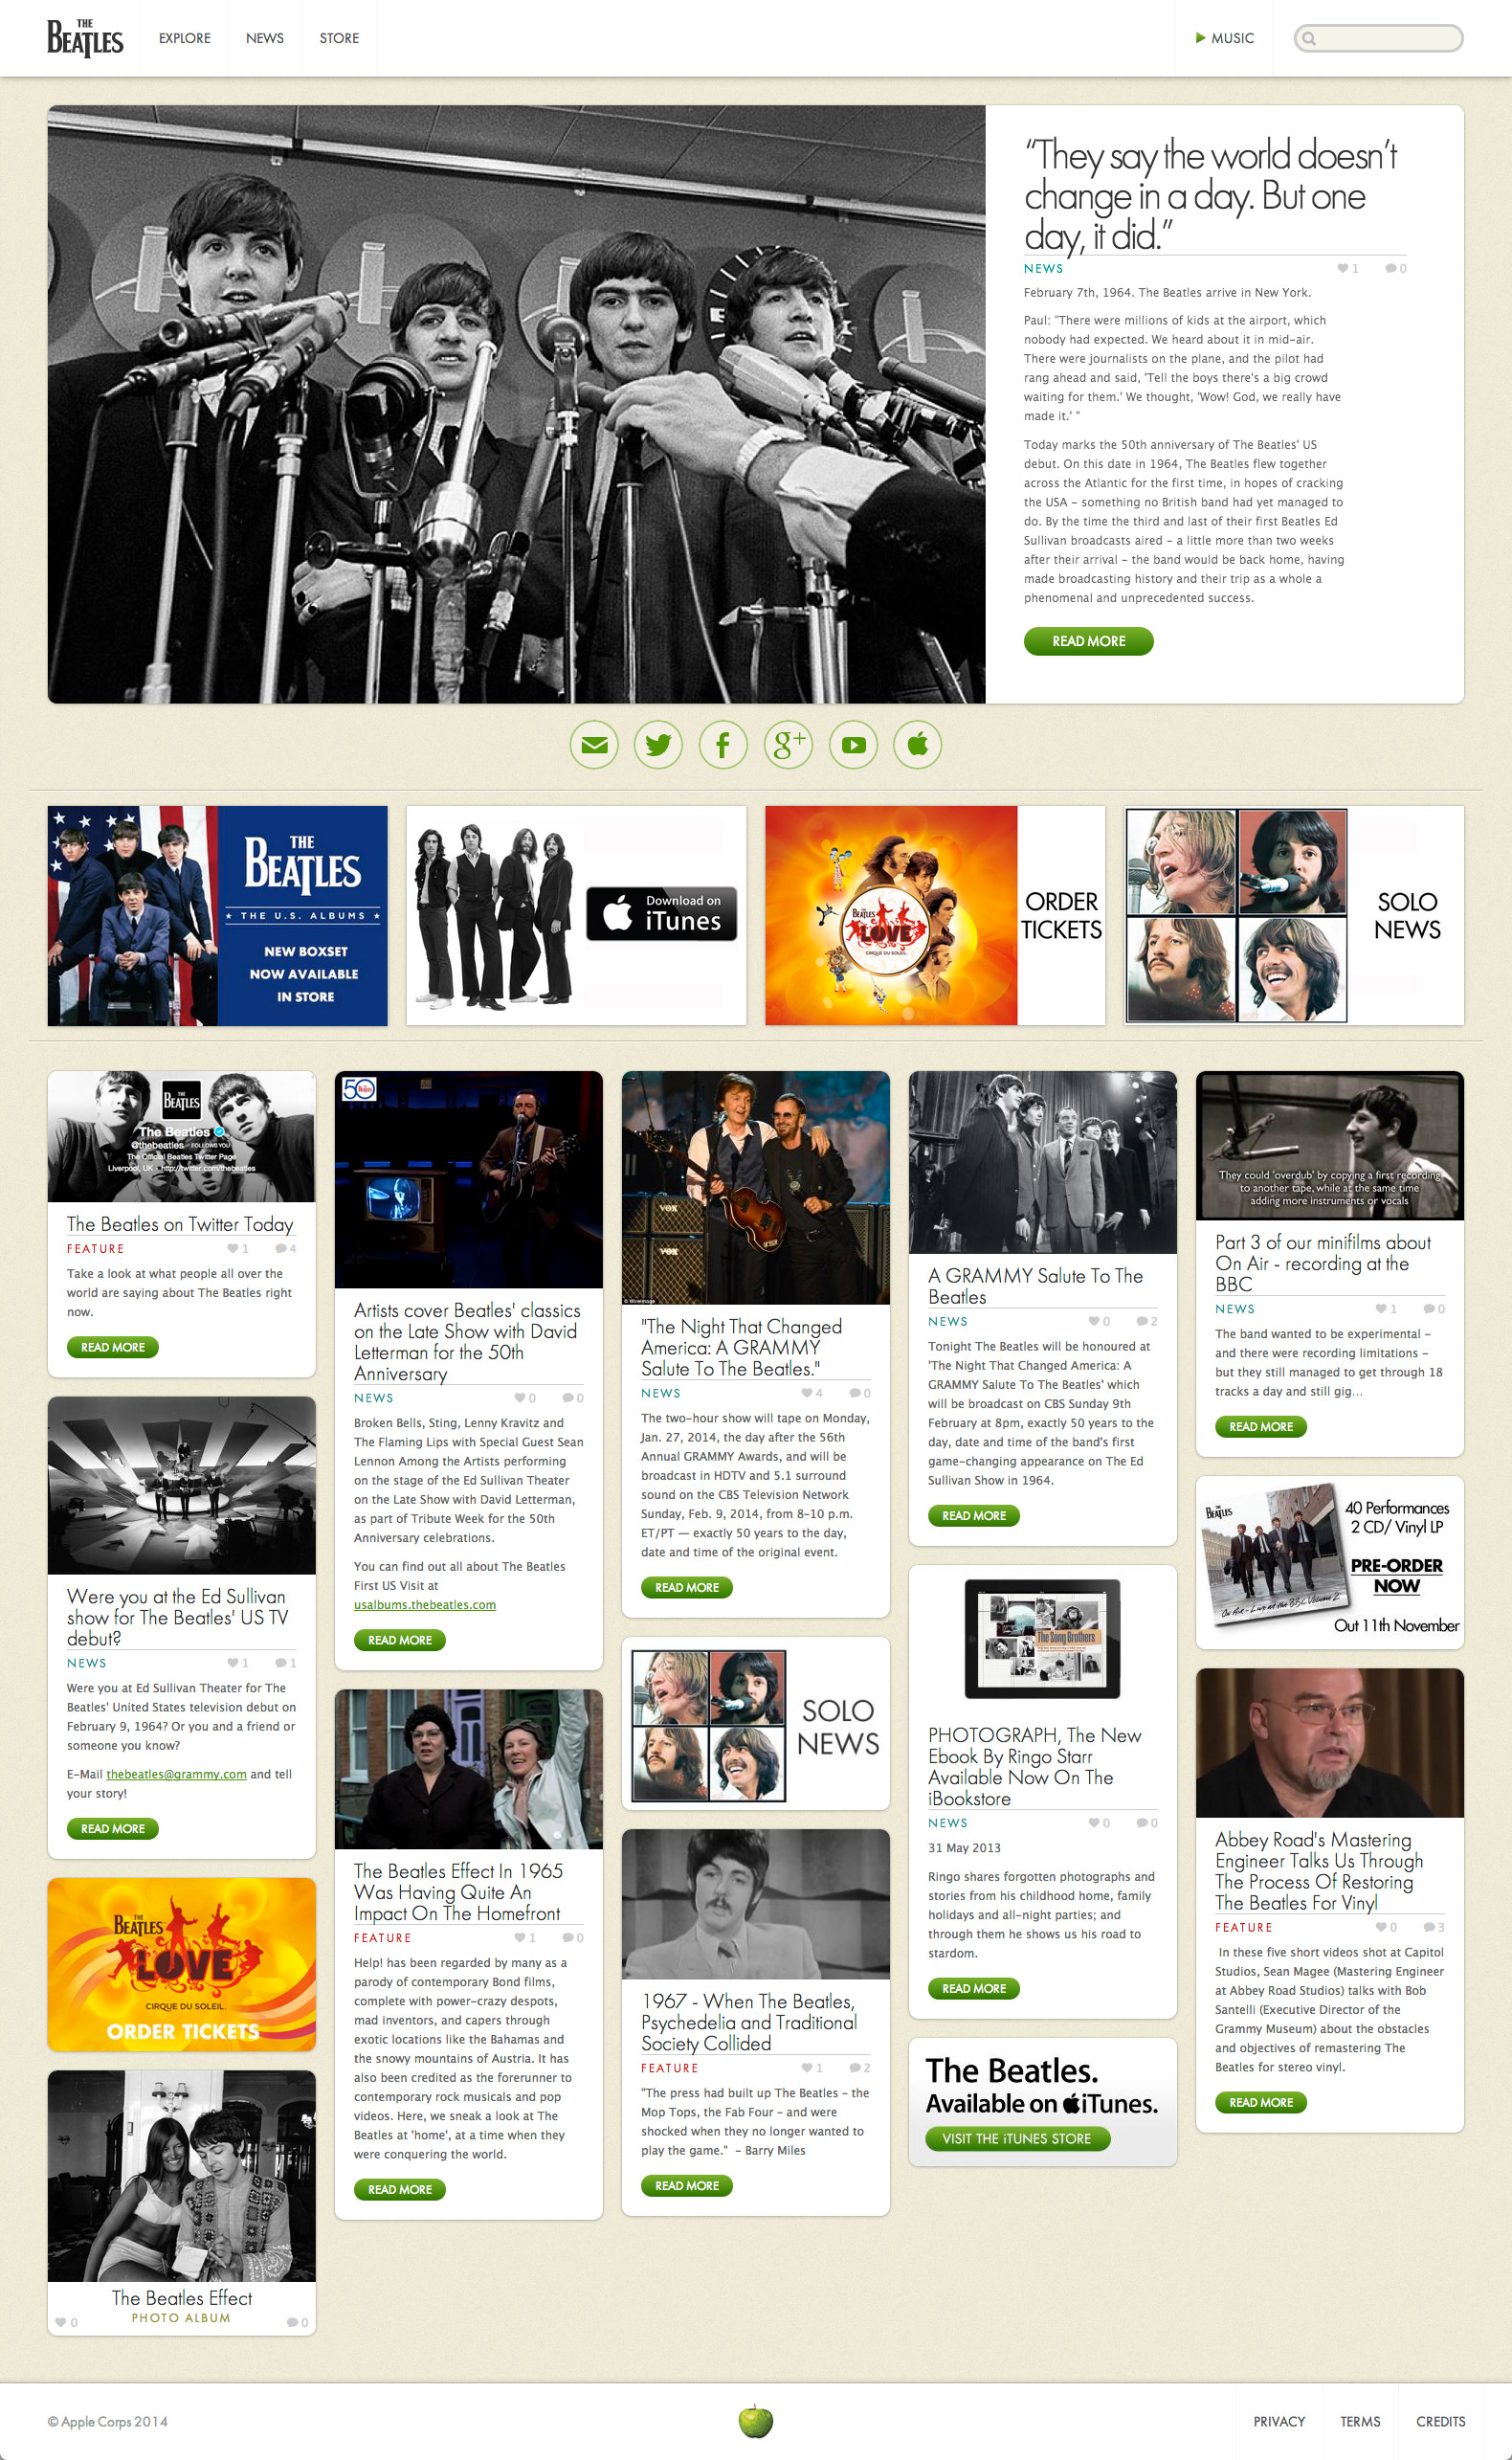 The Beatles official site